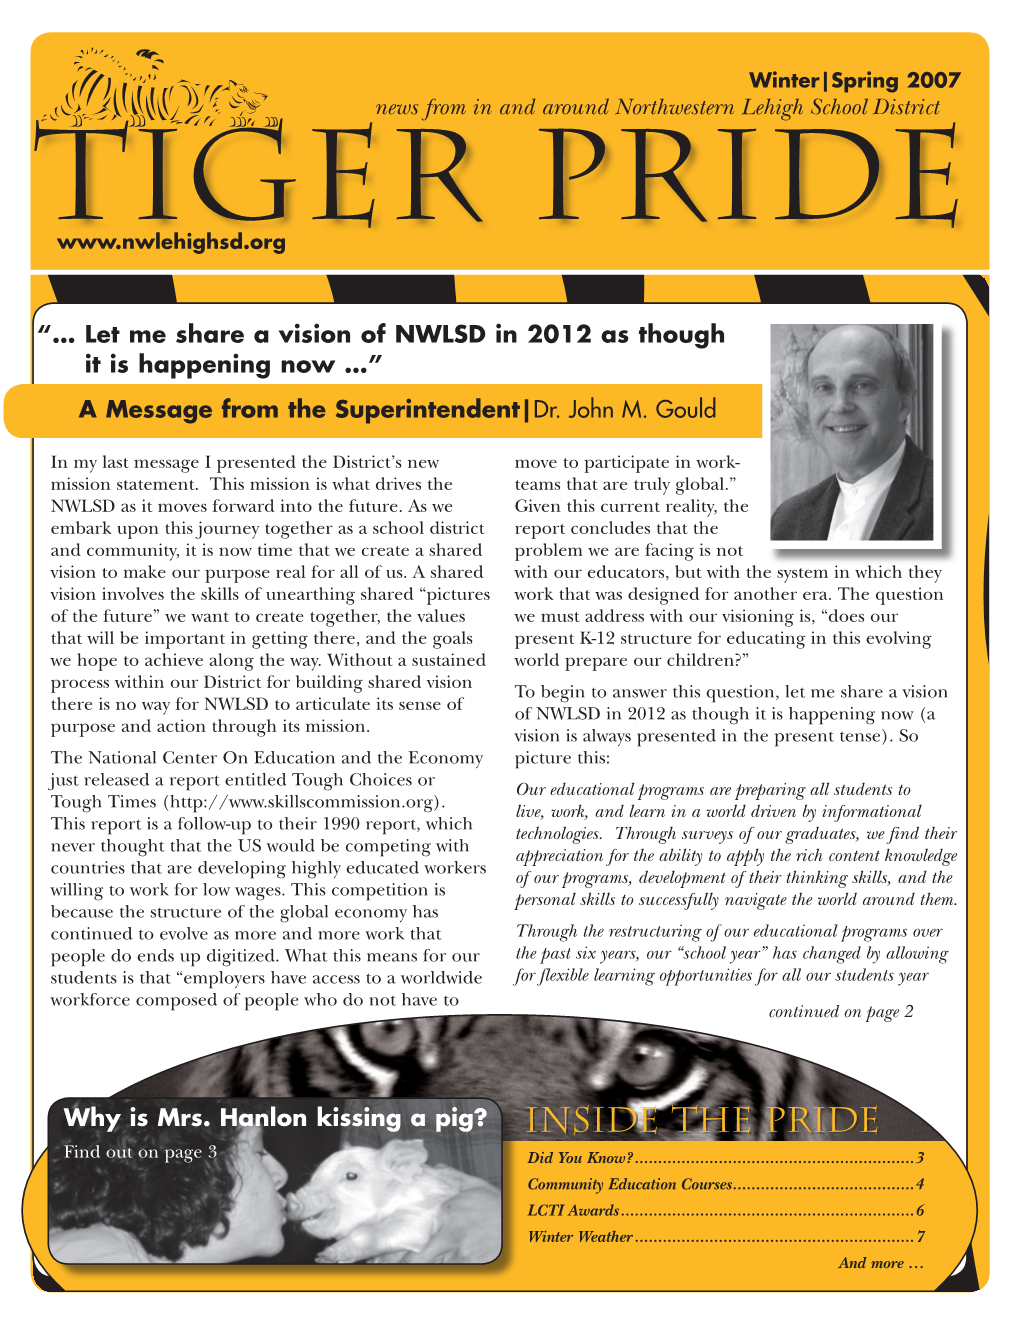 Inside the Pride Find out on Page 3 Did You Know?